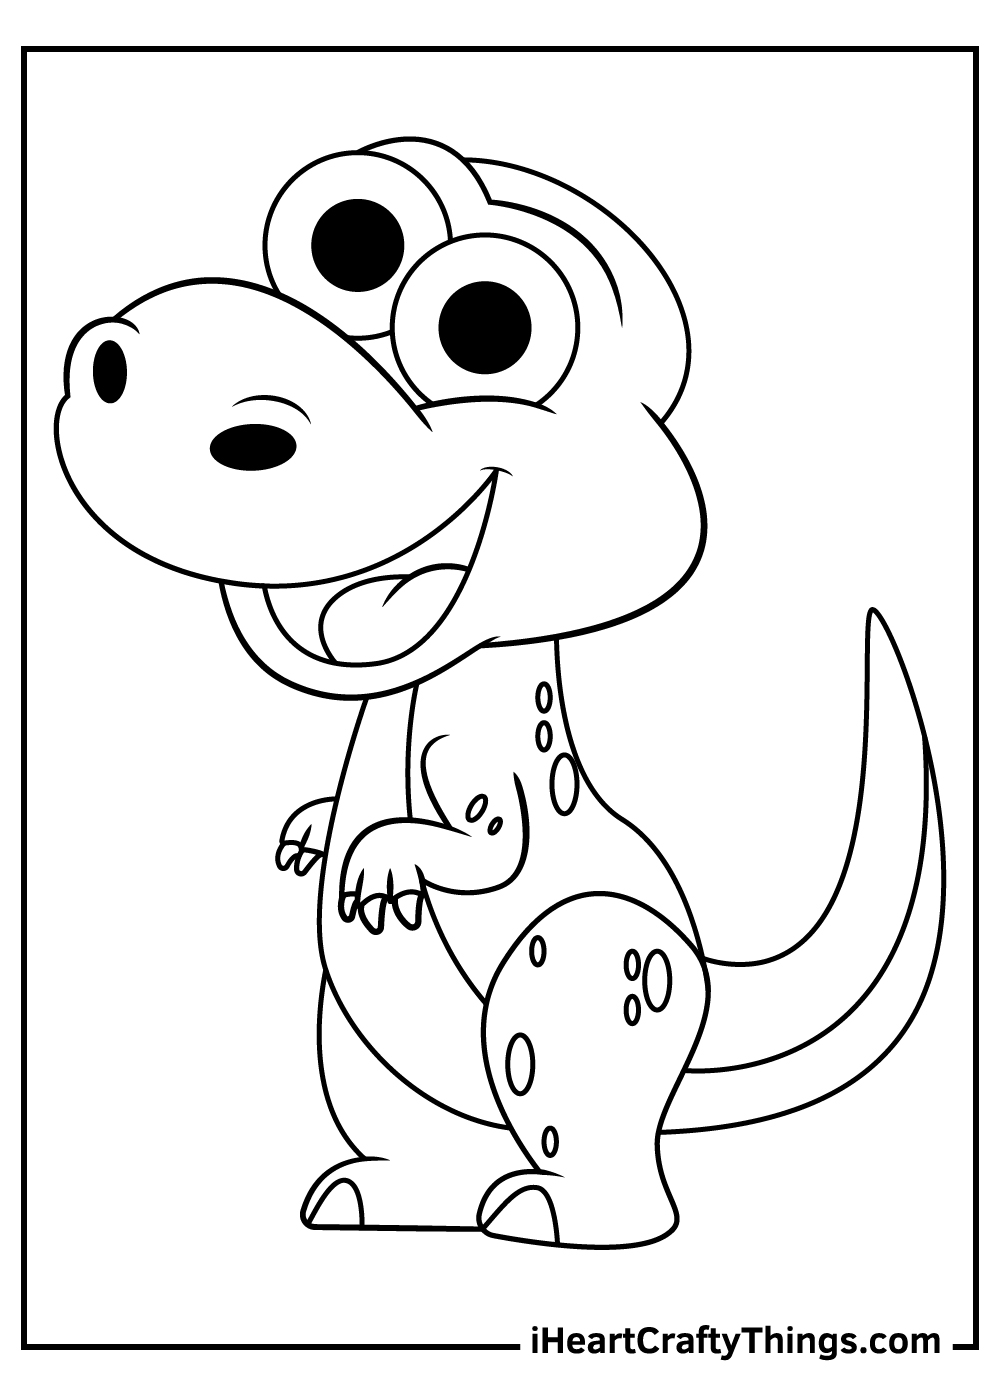 Cute Dinosaurs Coloring Pages Updated 20